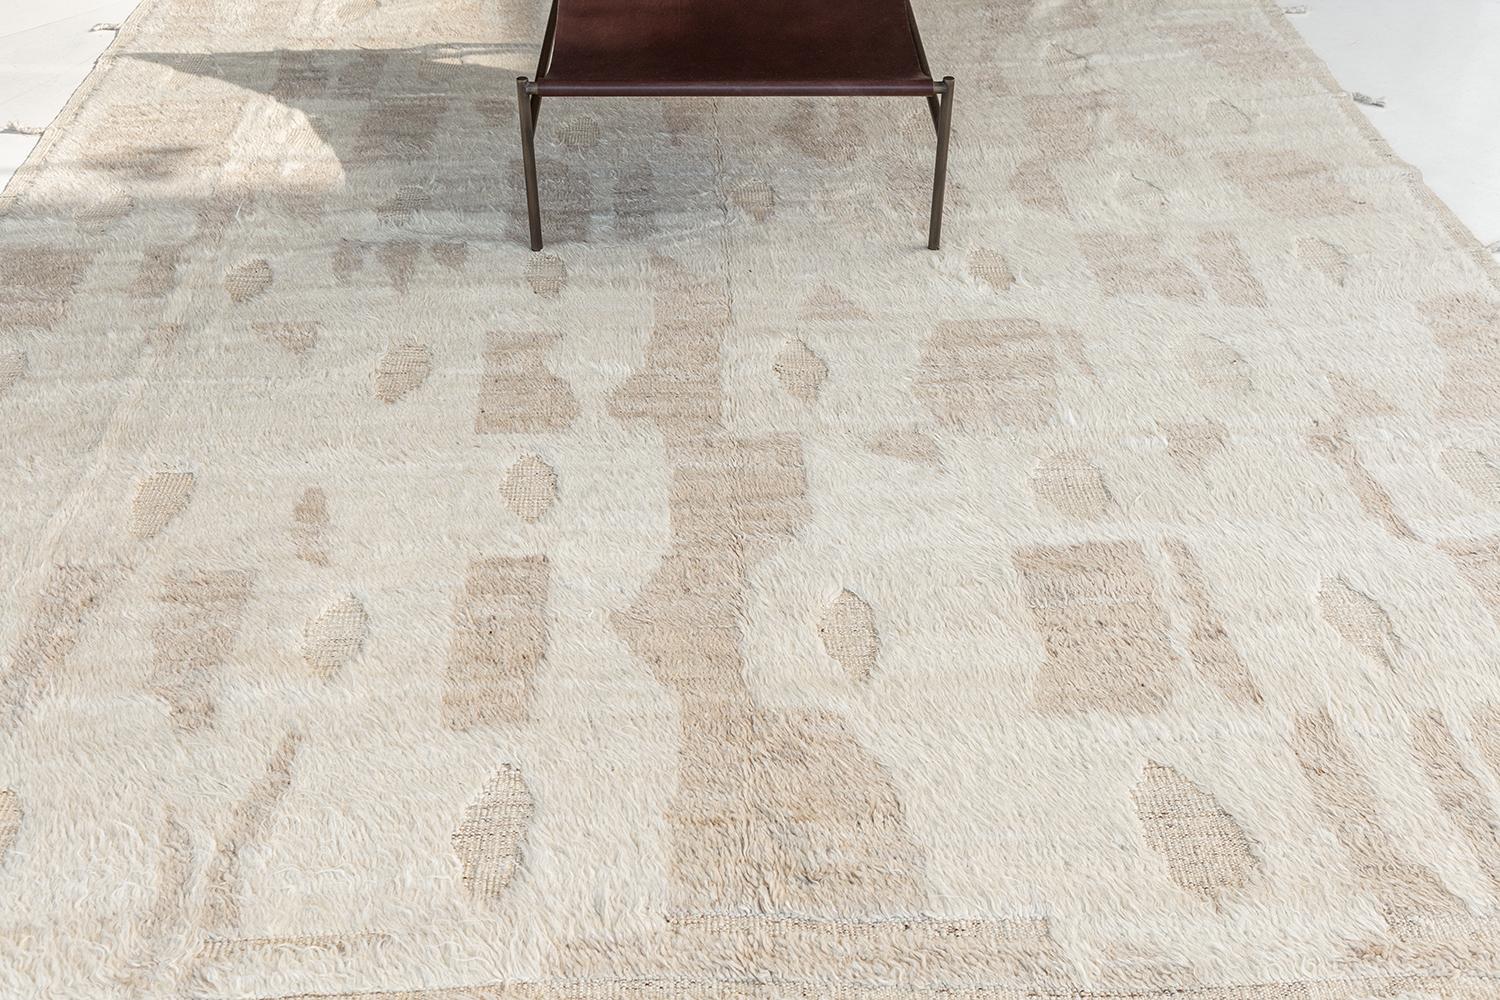 Fengfeng is made of luxurious wool and is made of timeless design elements. Its weaving of natural earth tones and unique embossed design is what makes the Haute Bohemian collection the signature collection of California. This rug, designed in Los